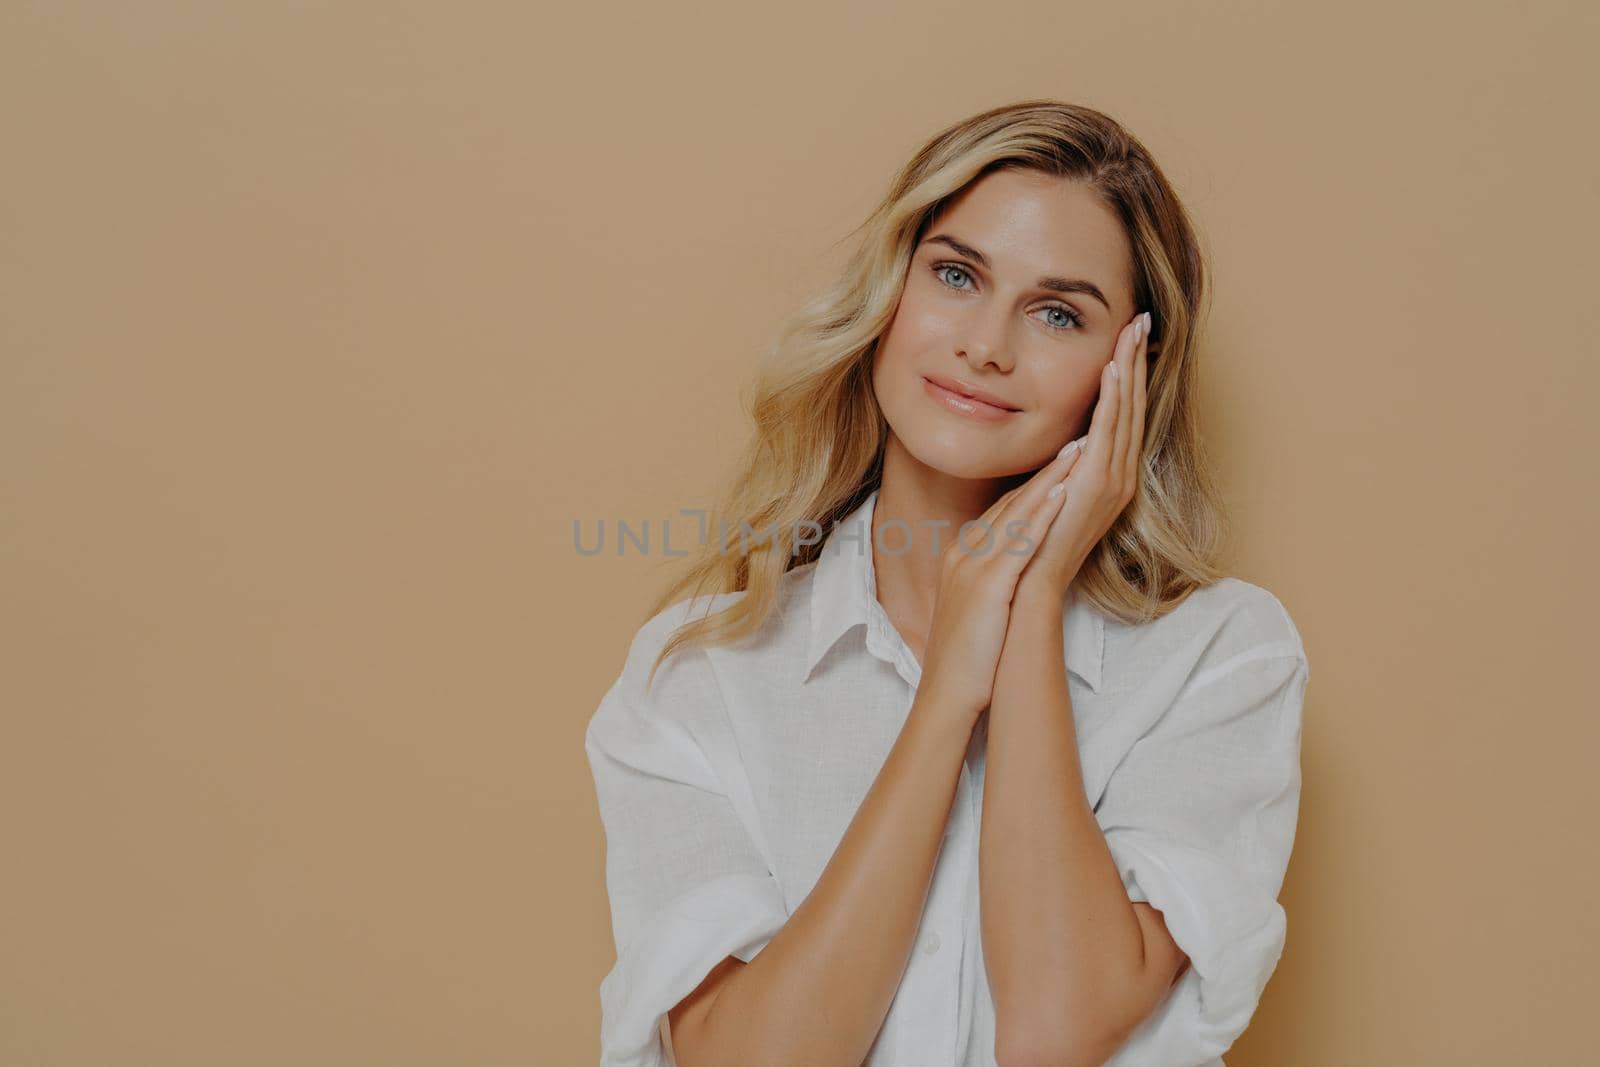 Romantic young blonde lady in casual white shirt keeping folded hands near her face and looking at camera with gentle smile, posing over beige background with copy space. Human face expressions